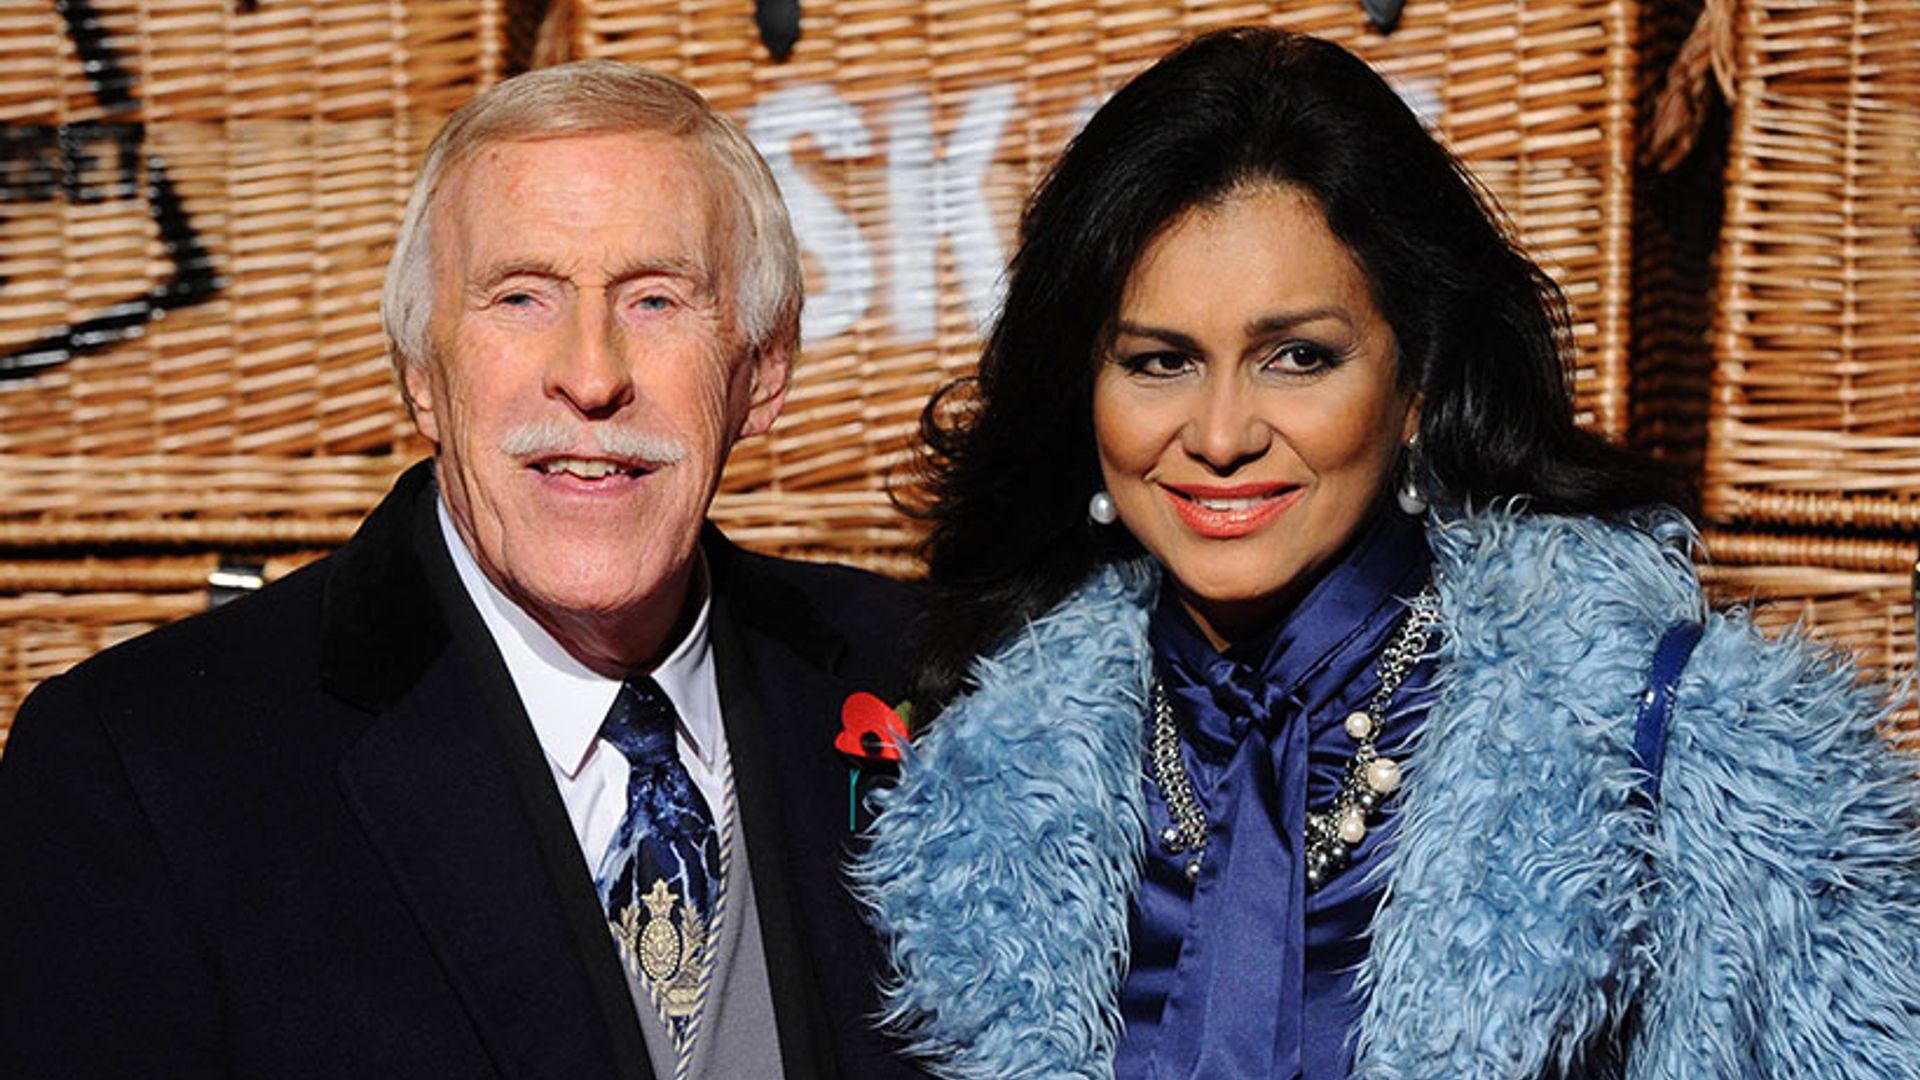 Sir Bruce Forsyth's widow Lady Wilnelia Merced opens up about the last moments of his life